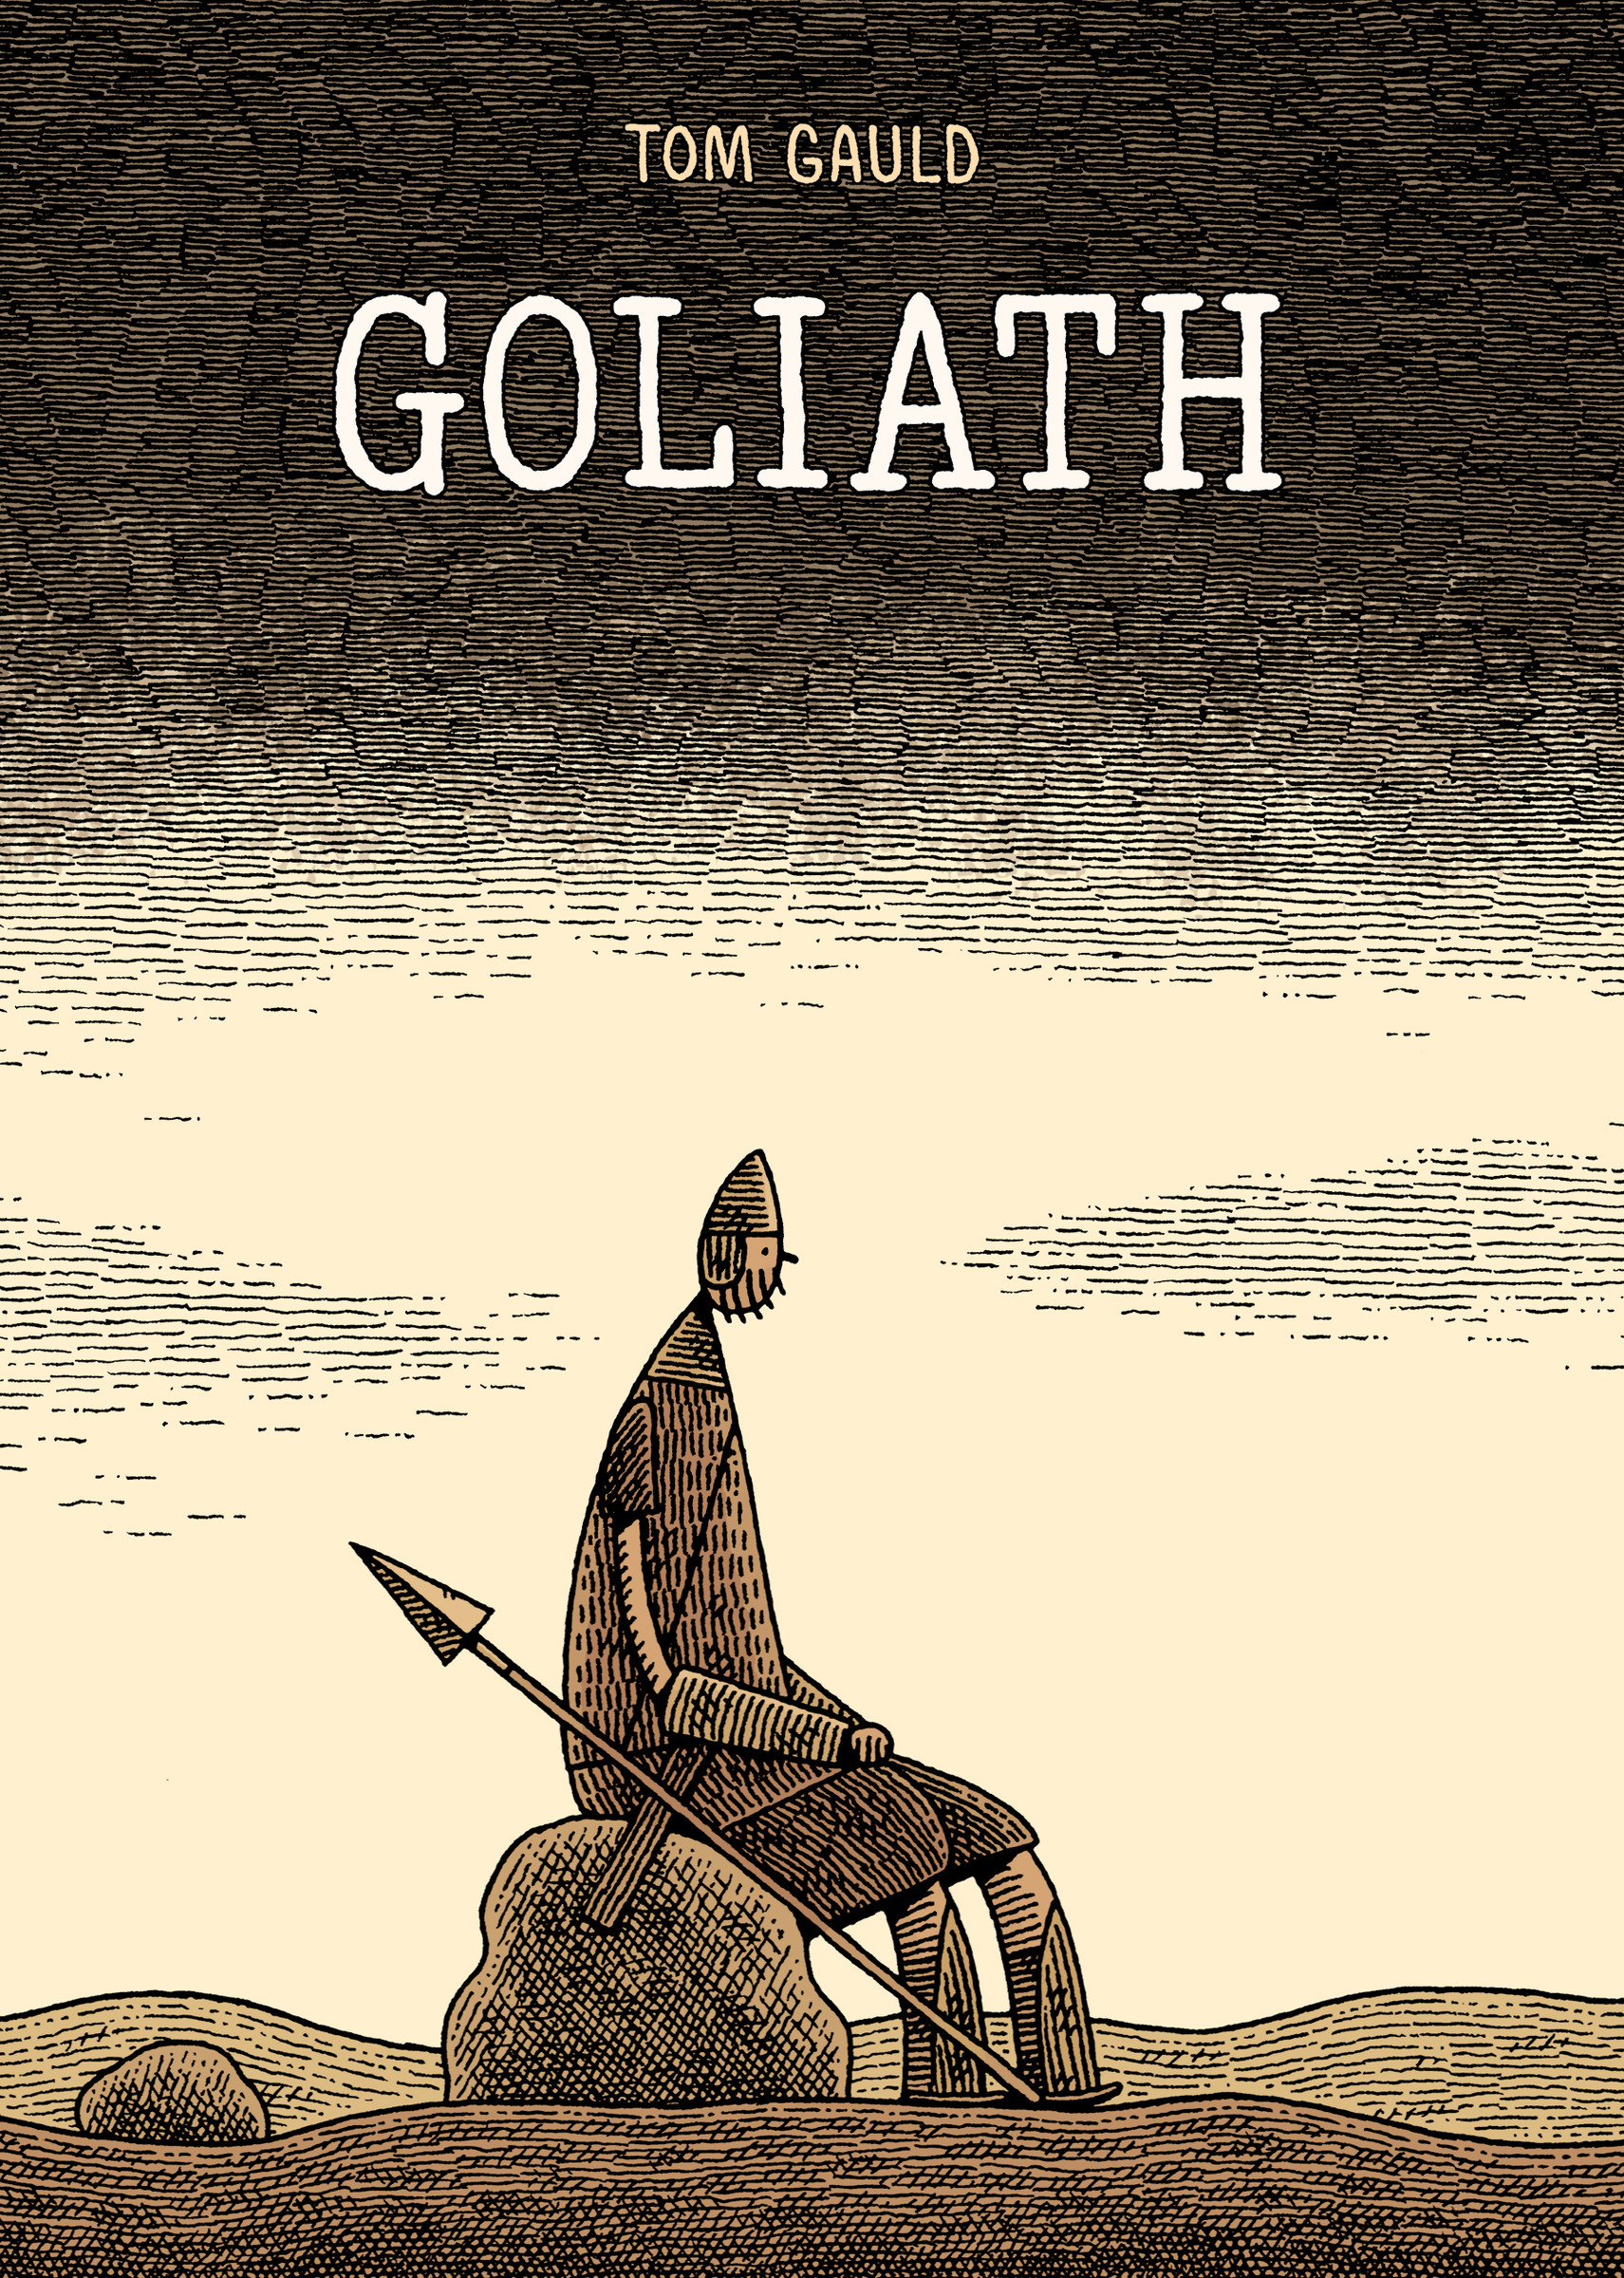 A drawing of Goliath sitting alone on a rock. The image is the cover of the graphic novel Goliath, by Tom Gauld.